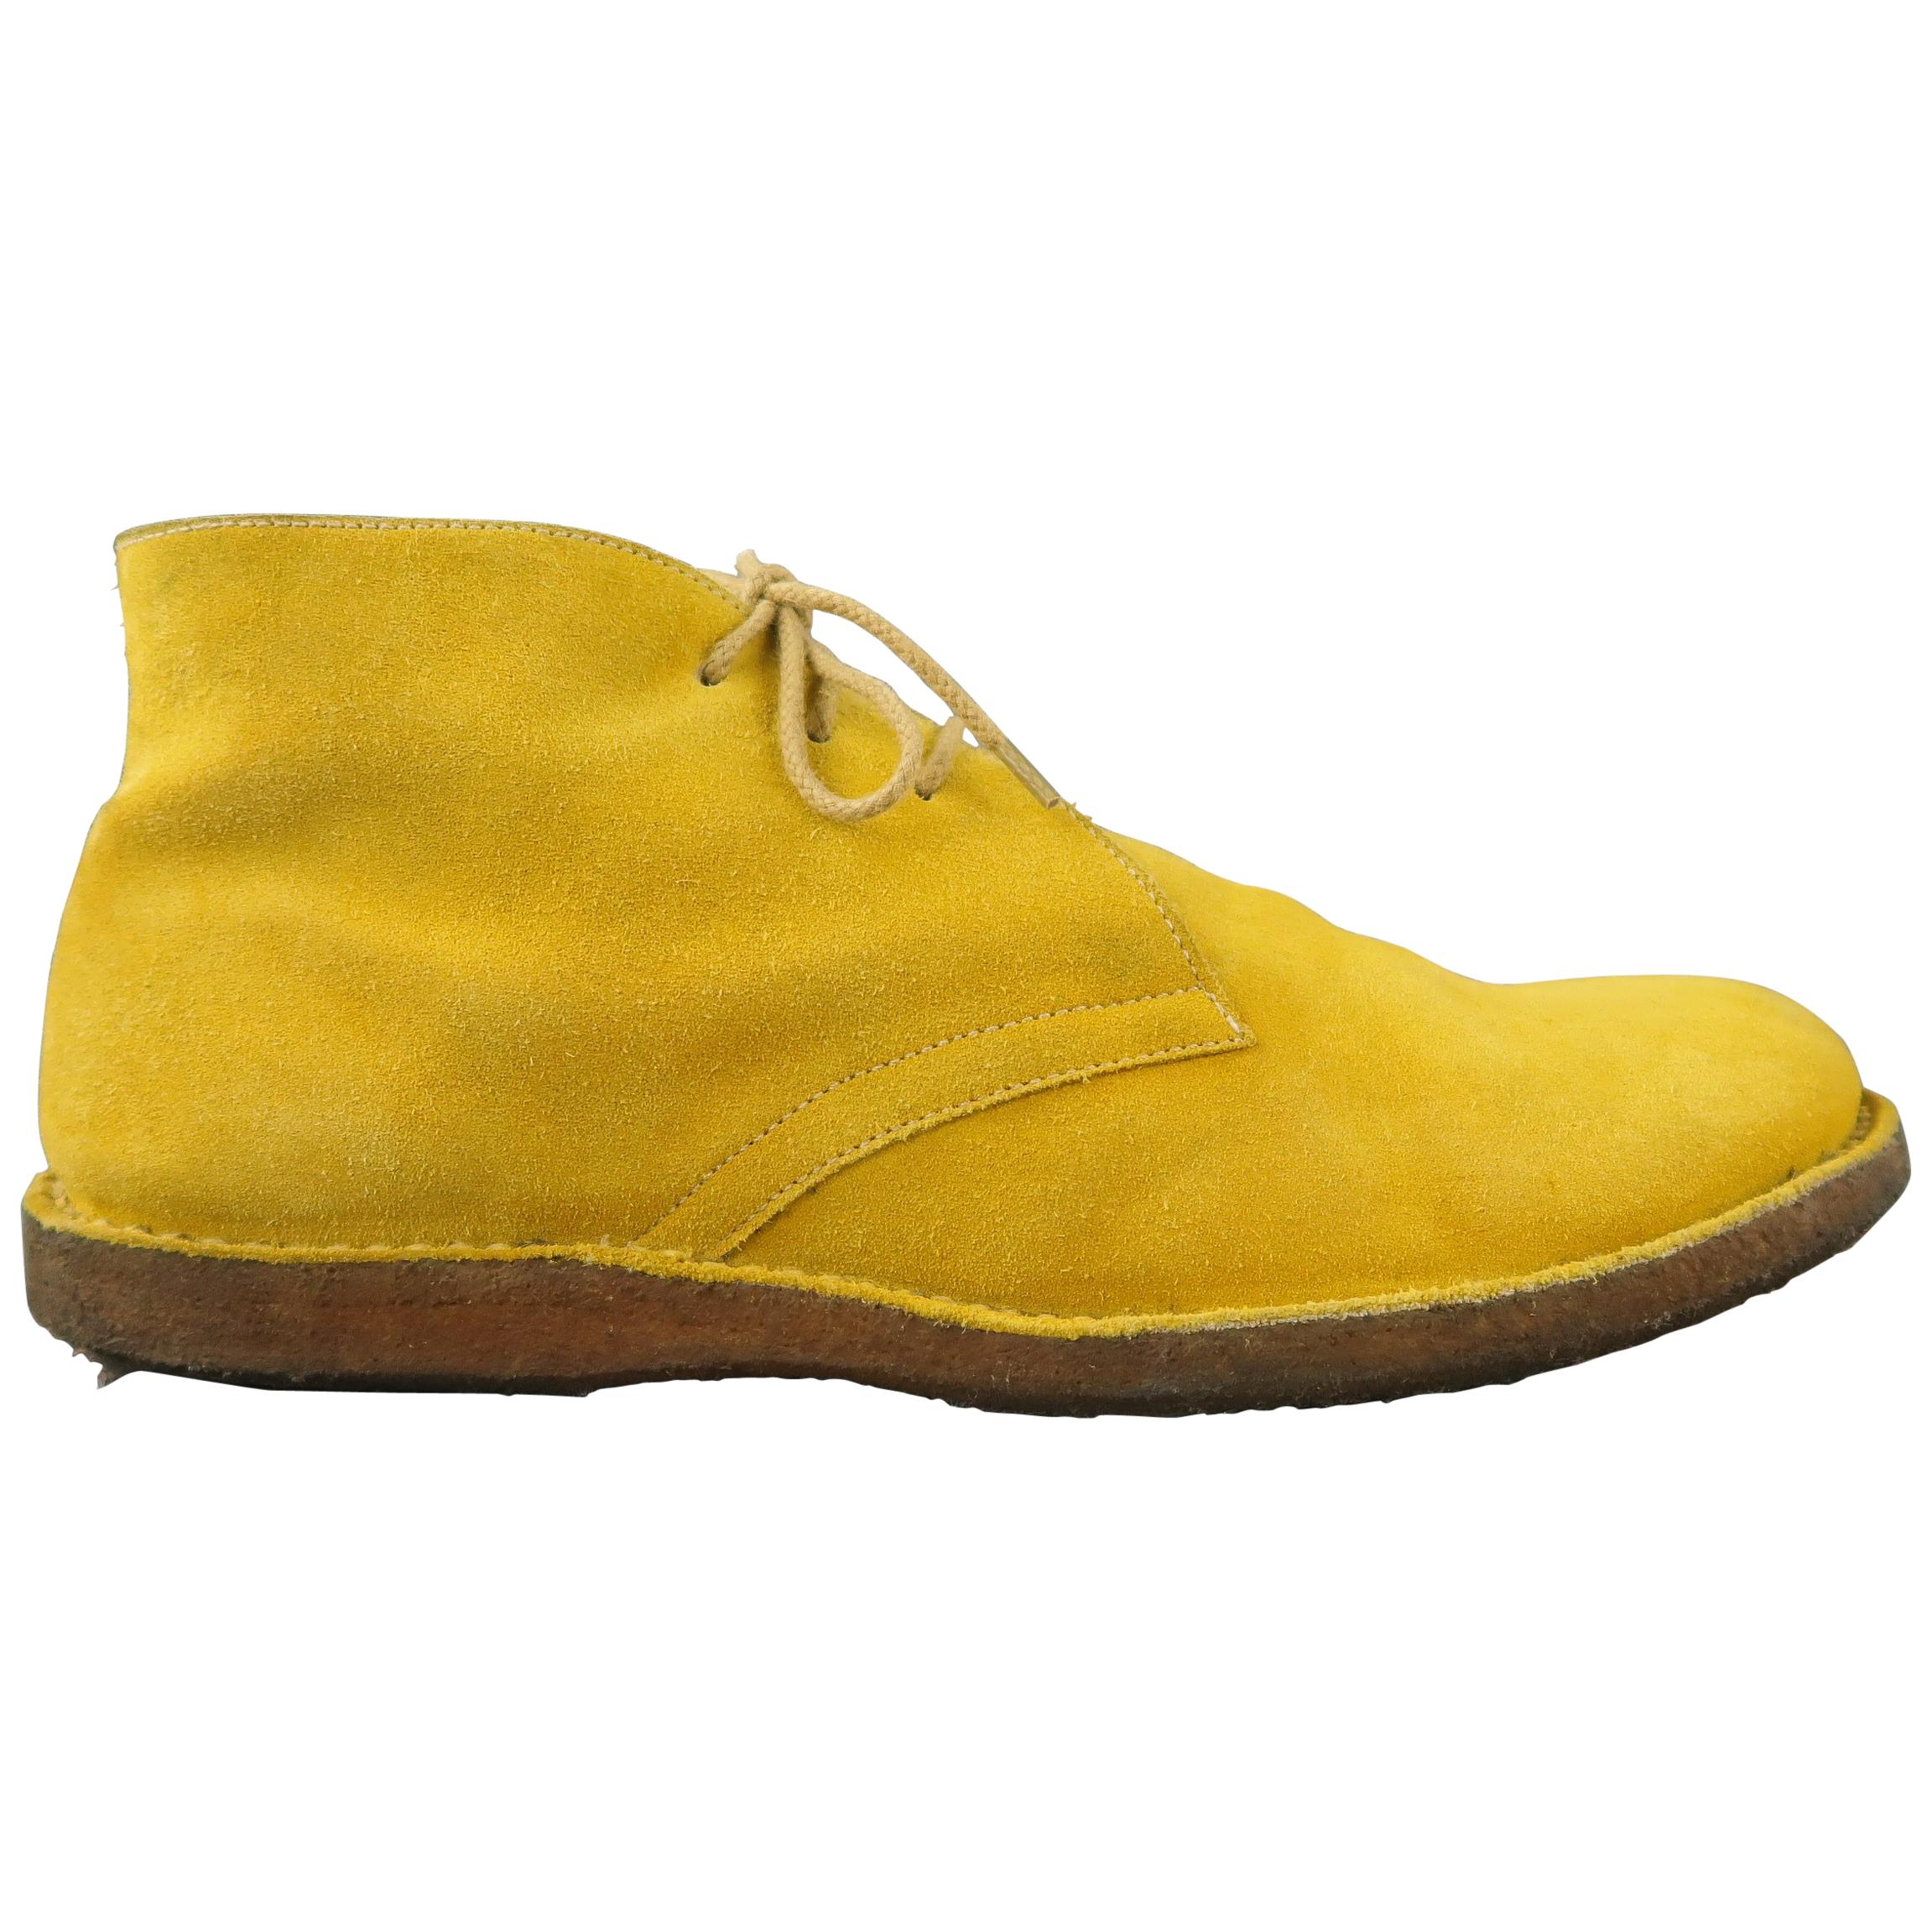 JIL SANDER Size 9 Yellow Solid Suede Lace Up Boots